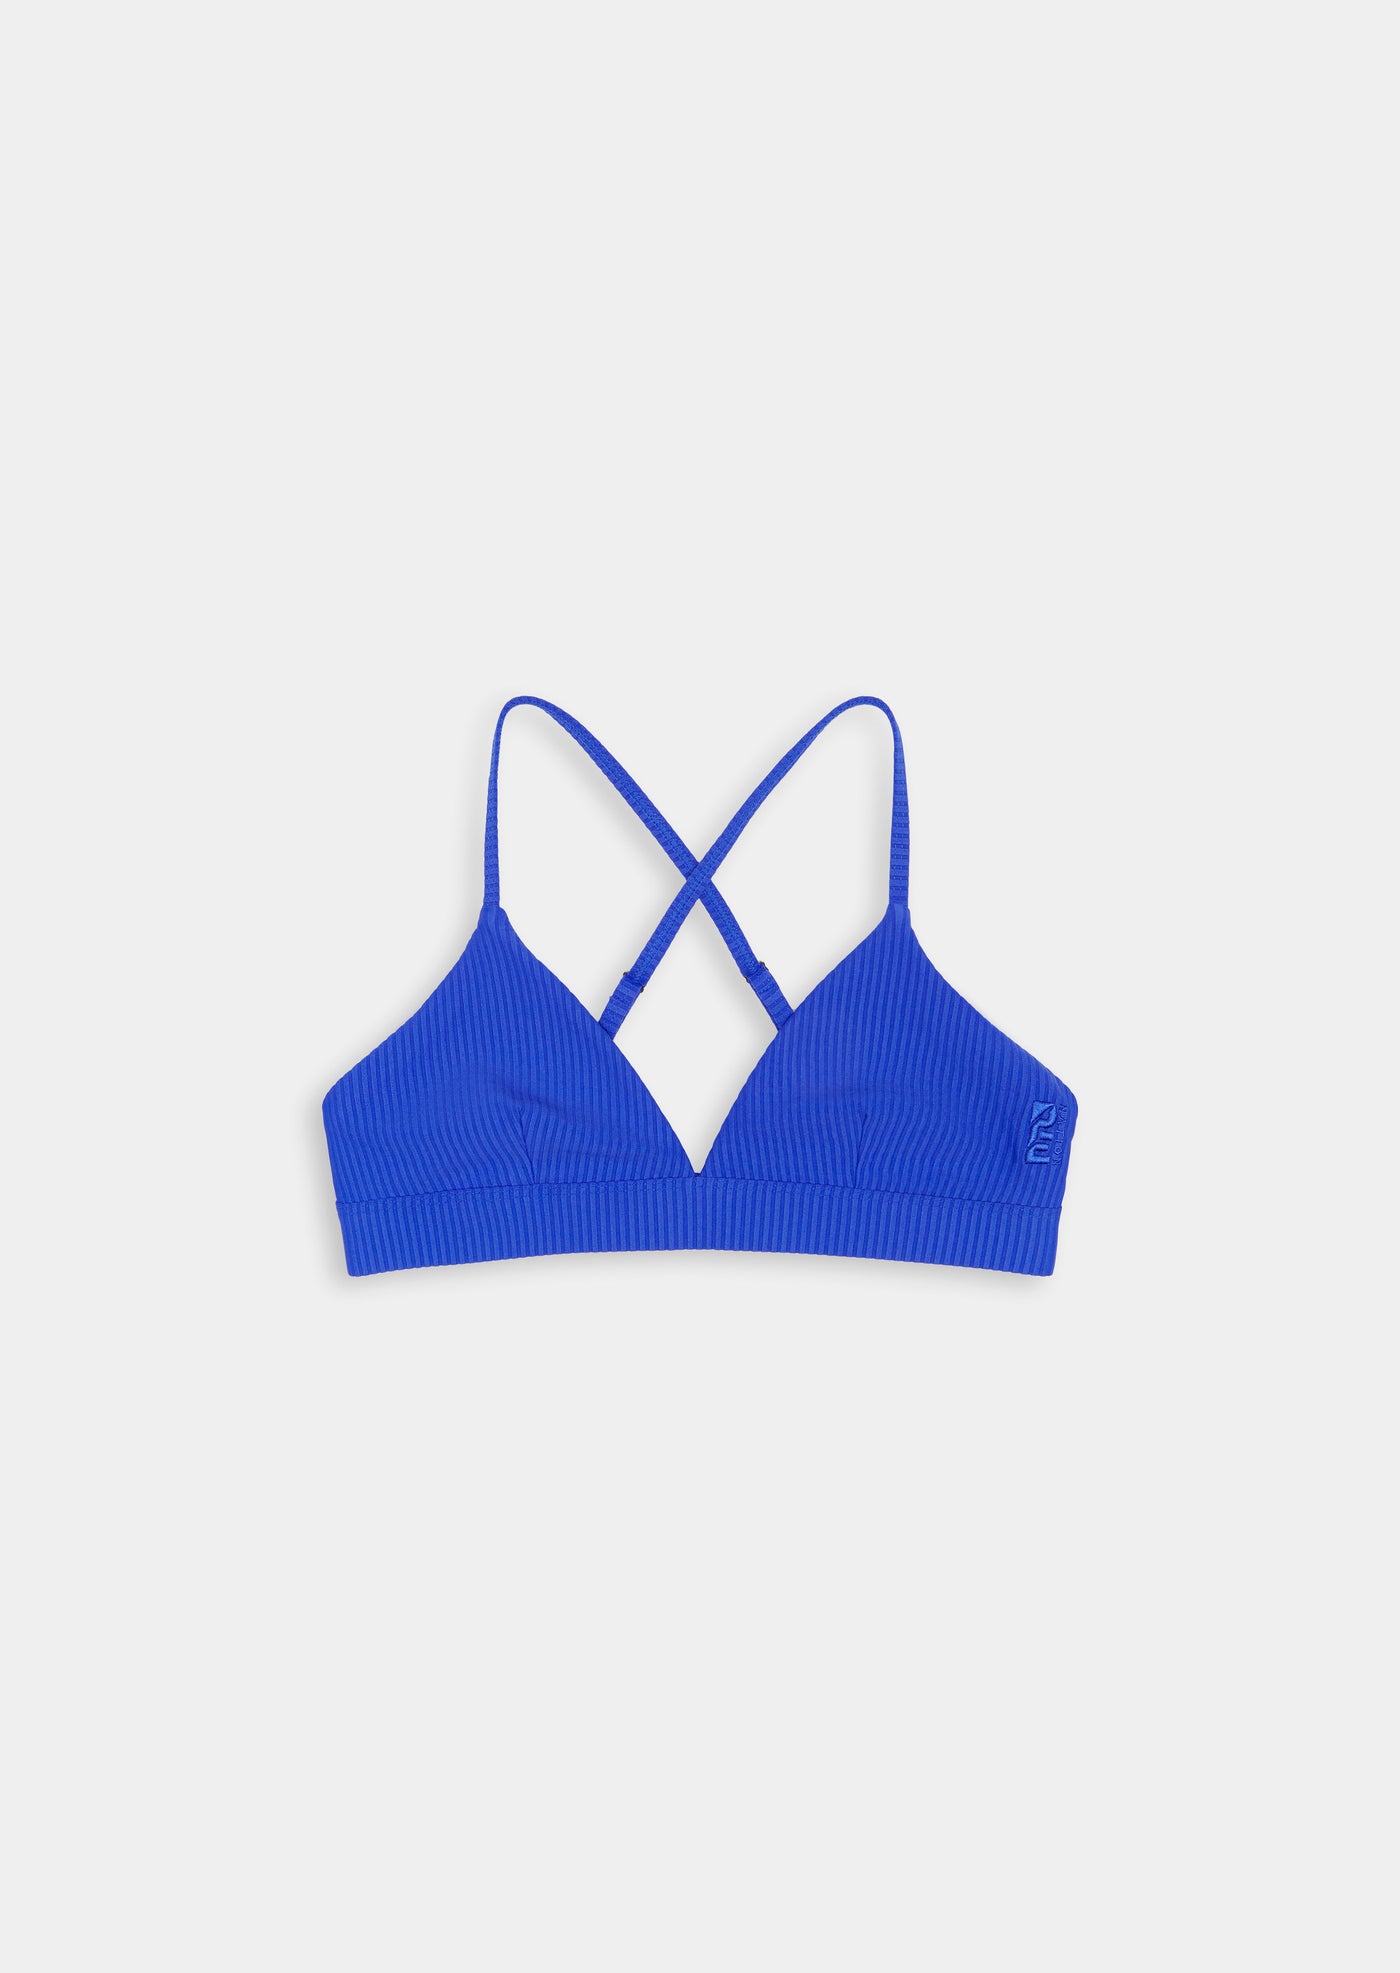 FREE PLAY SPORTS BRA IN ELECTRIC BLUE